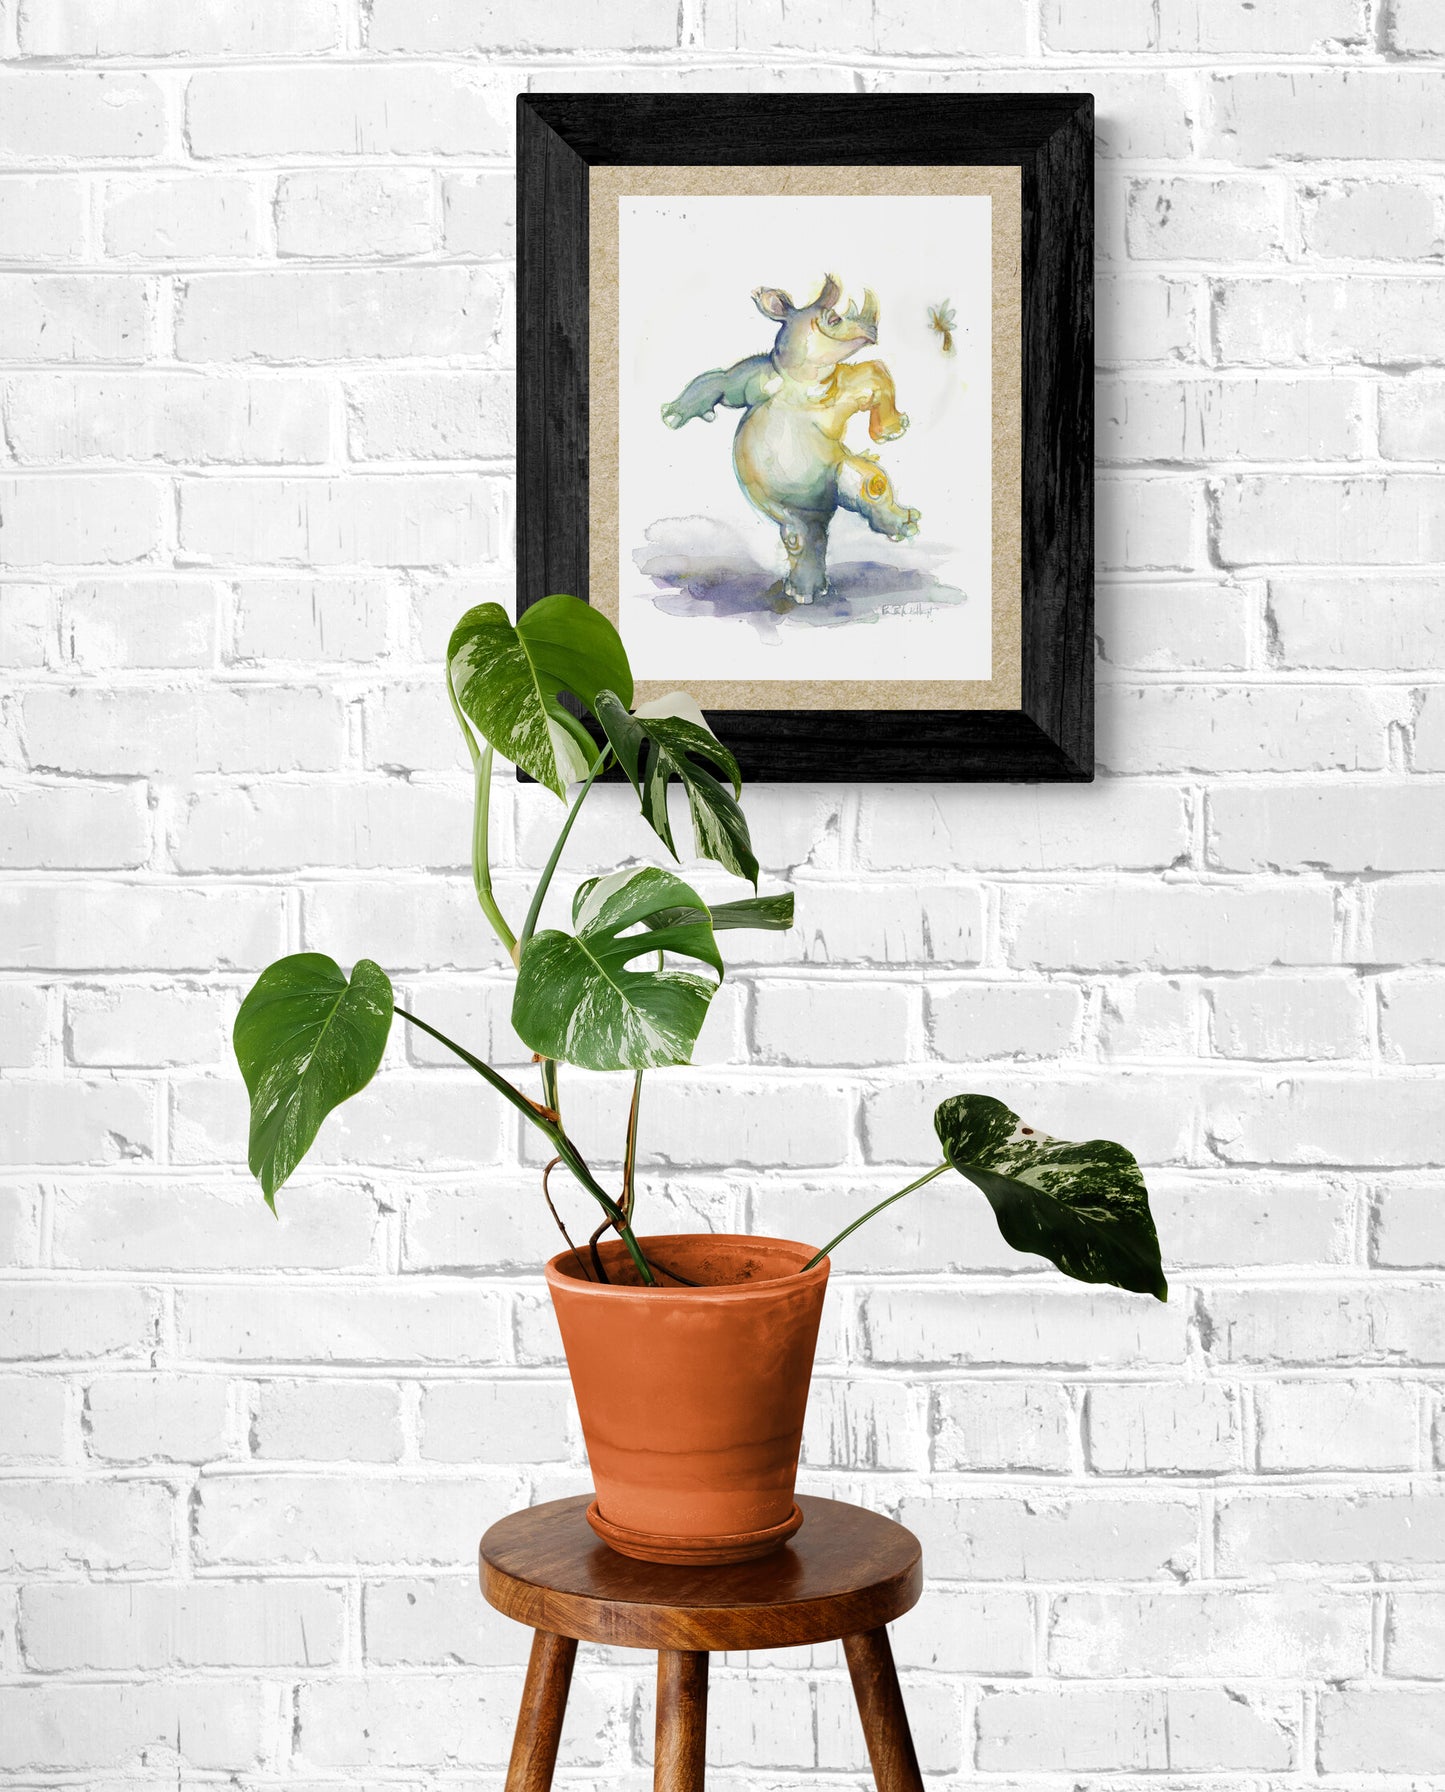 Here Pam's original artwork of a dancing rhinoceros can be seen framed above a potted plant 